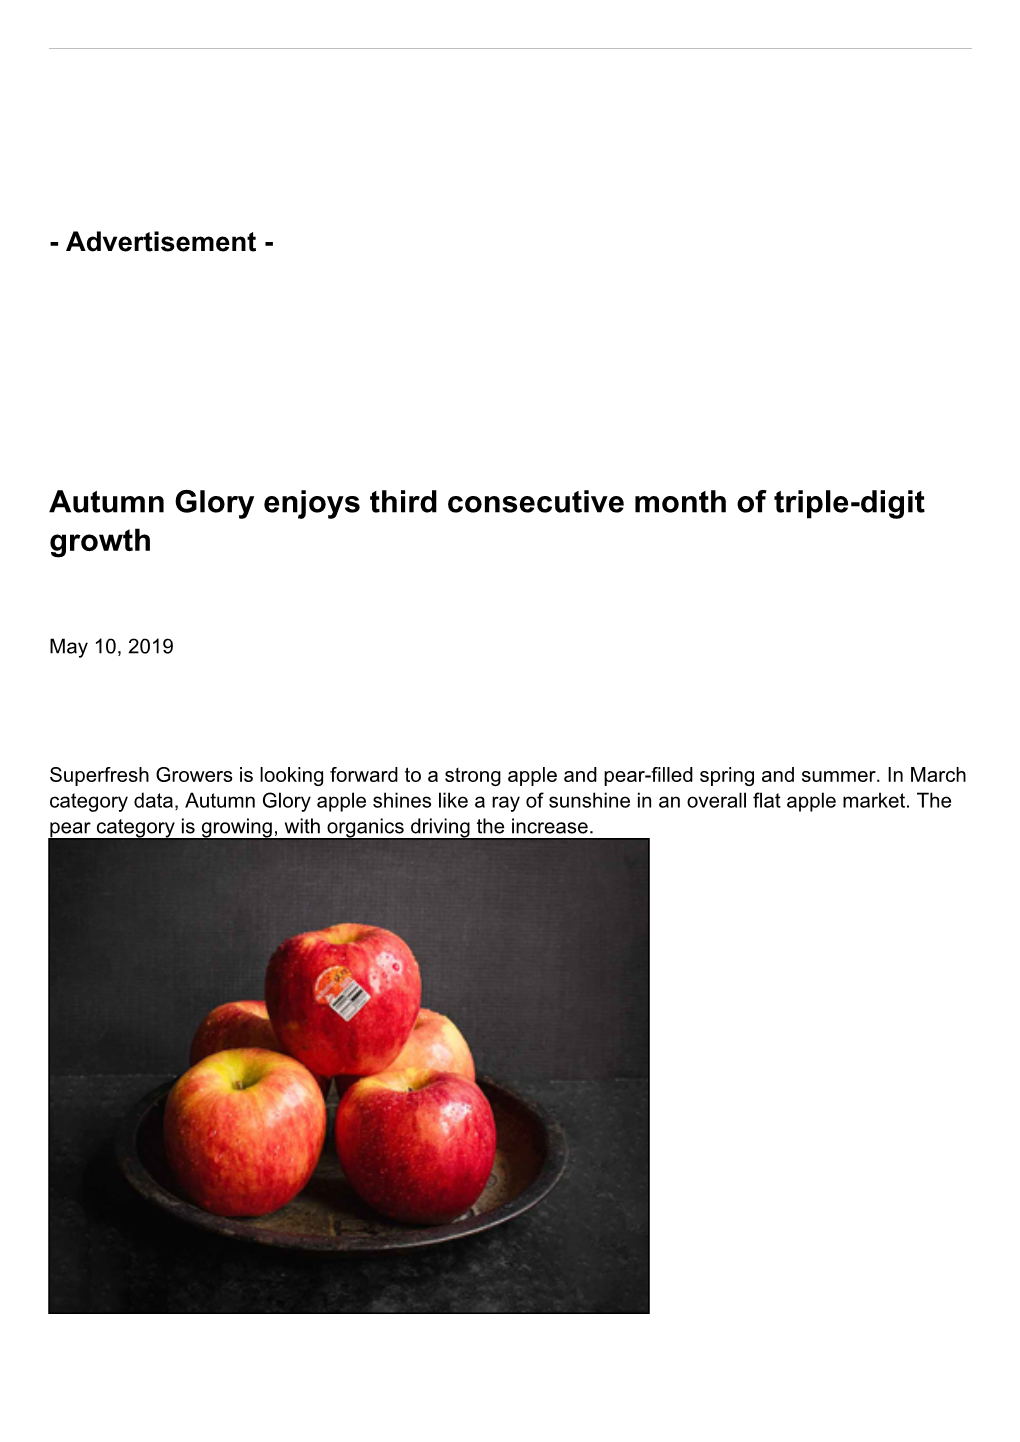 Autumn Glory Enjoys Third Consecutive Month of Triple-Digit Growth